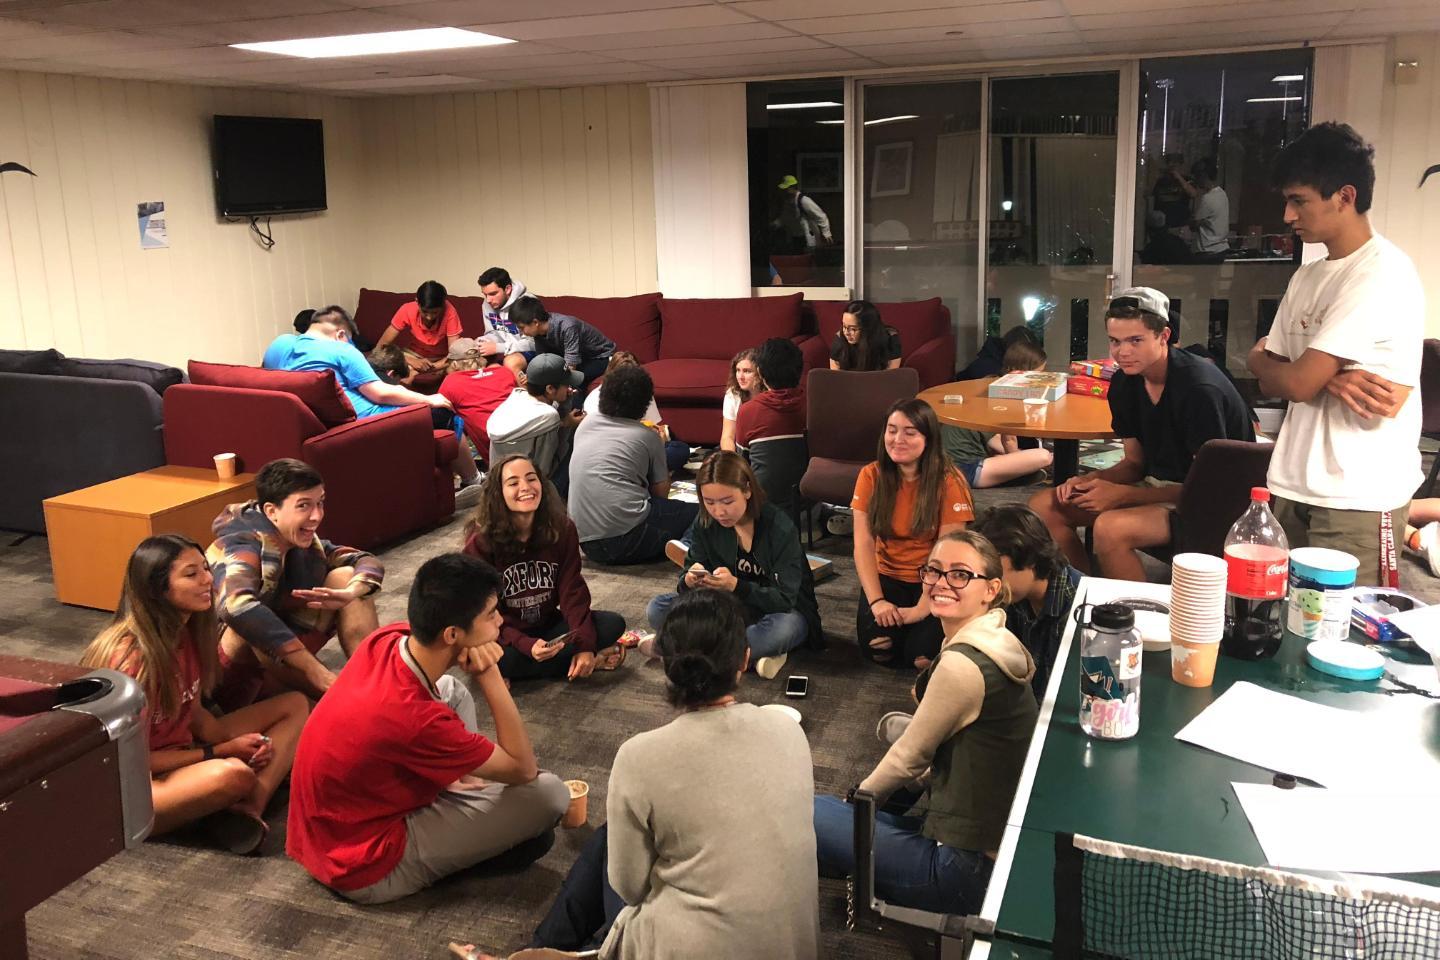 A crowded common room with groups of students chatting and socializing